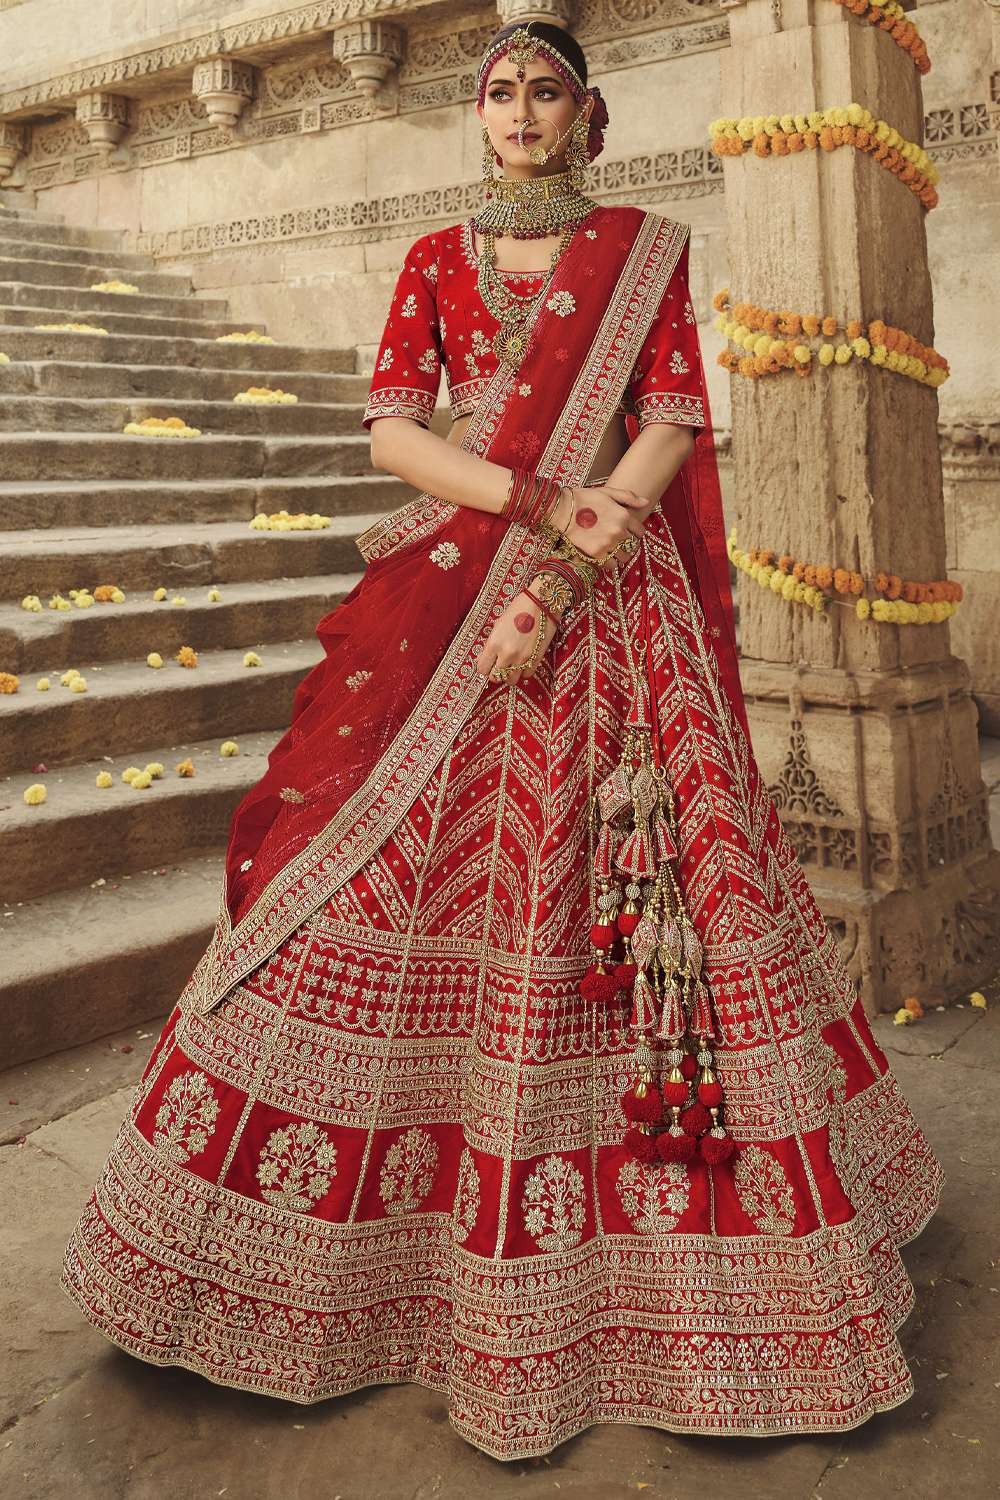 Pin on Indian Blouses - Wedding Inspiration